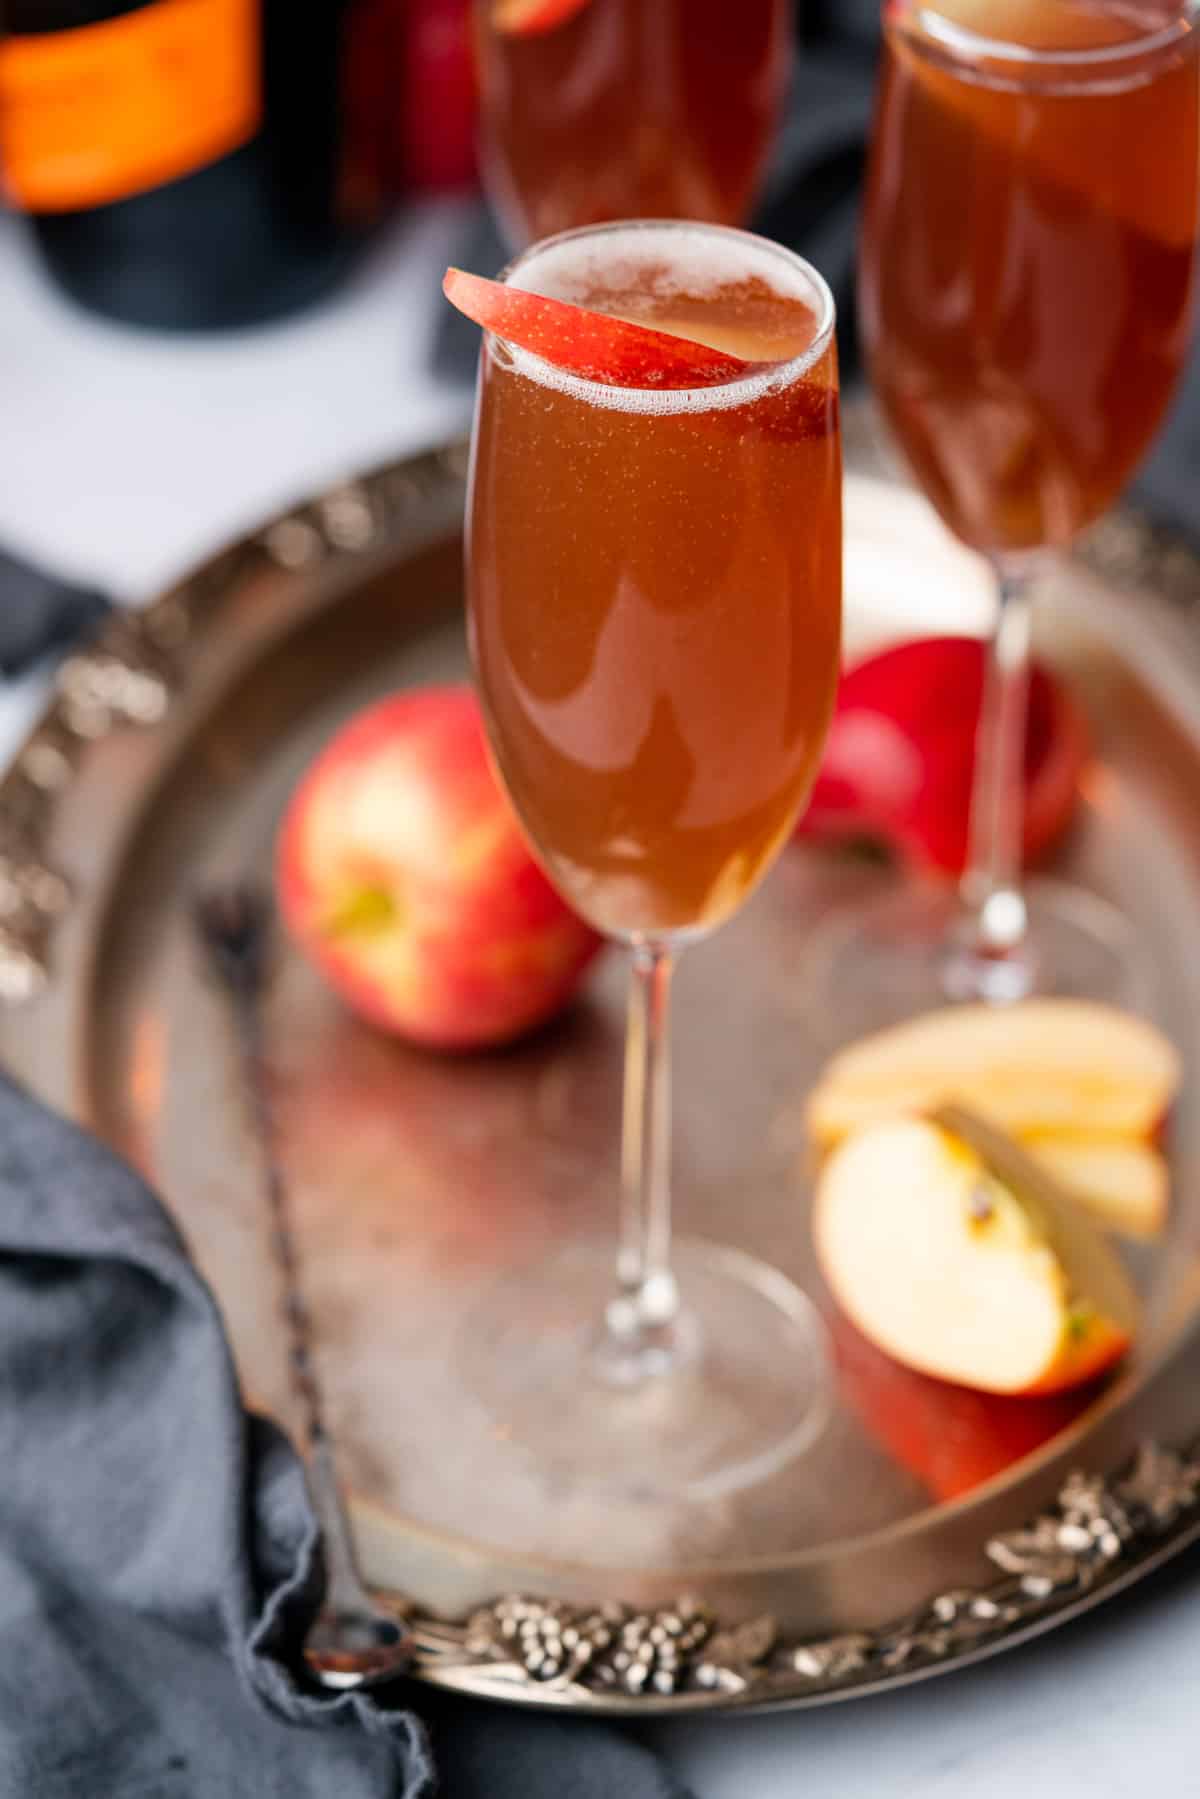 apple cider mimosa on a meal tray surrounded by fresh apples